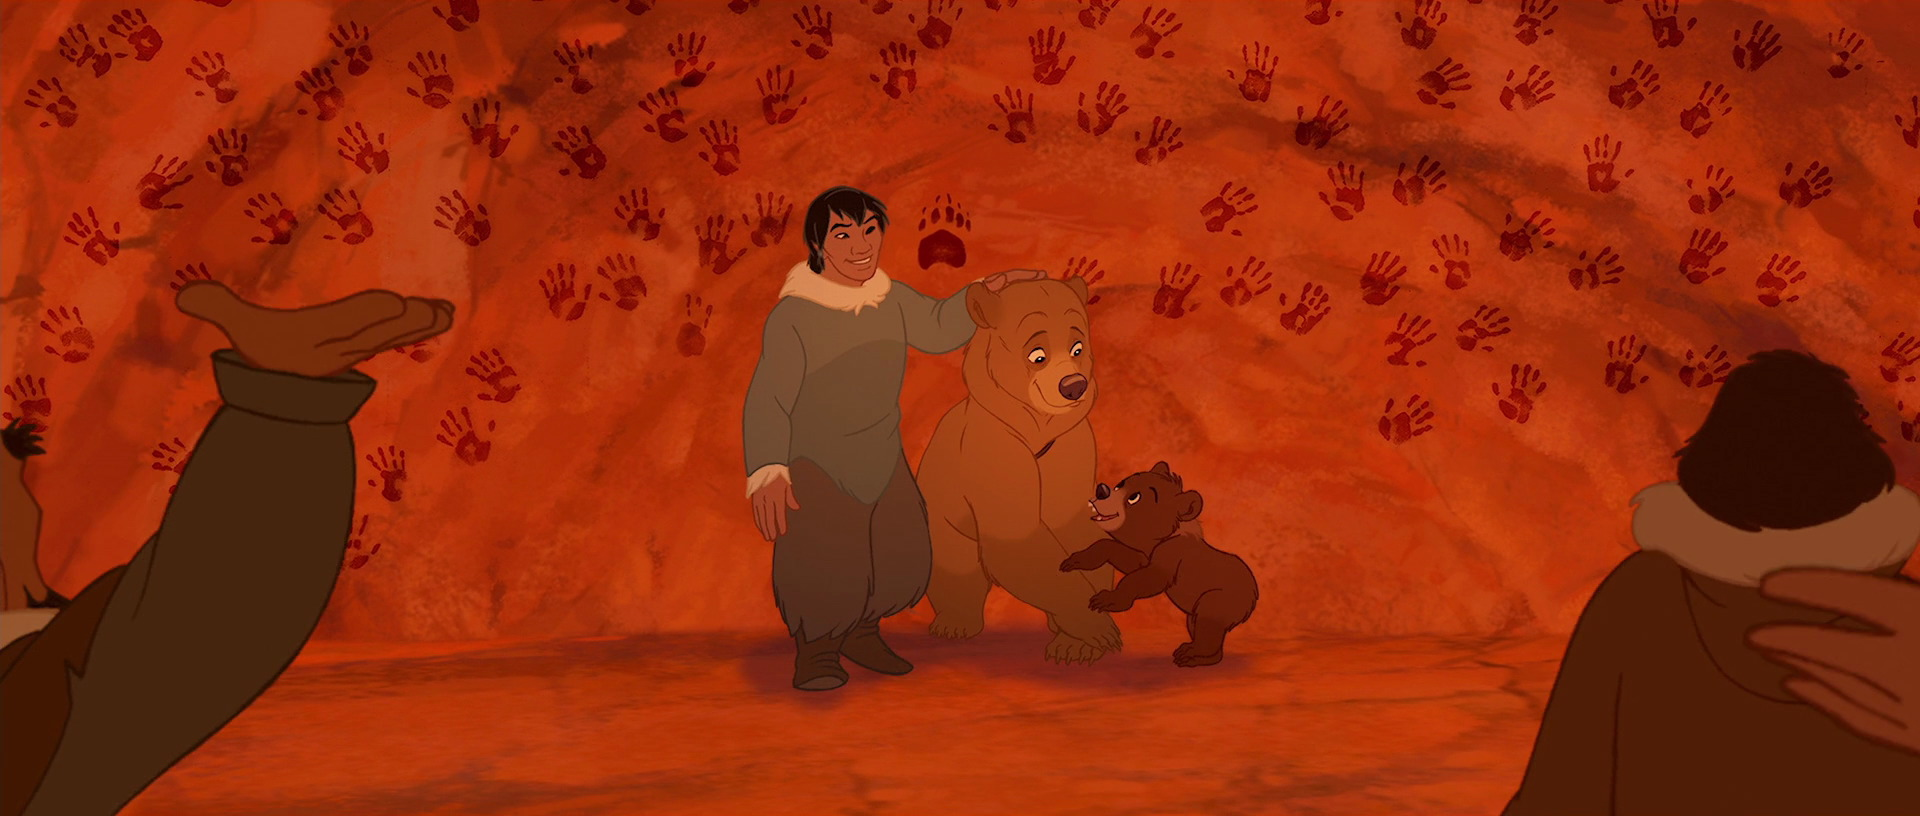 brother bear and narcissus